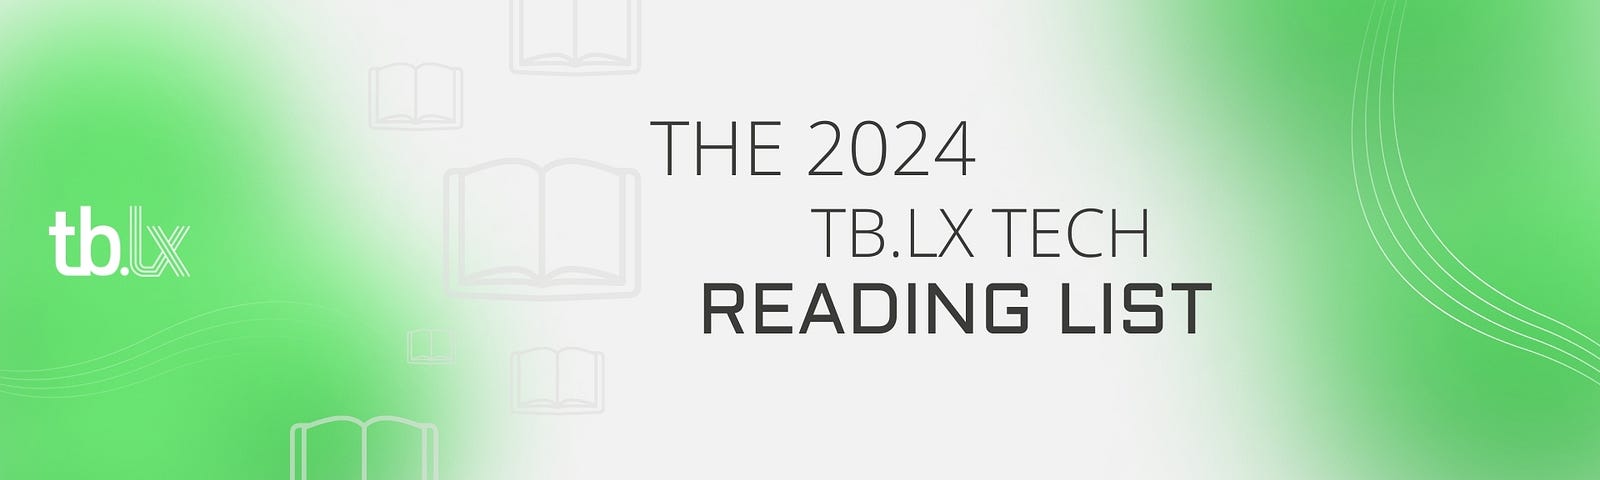 graphic banner with book icons, tb.lx green shades and title “The 2024 tb.lx tech reading list”